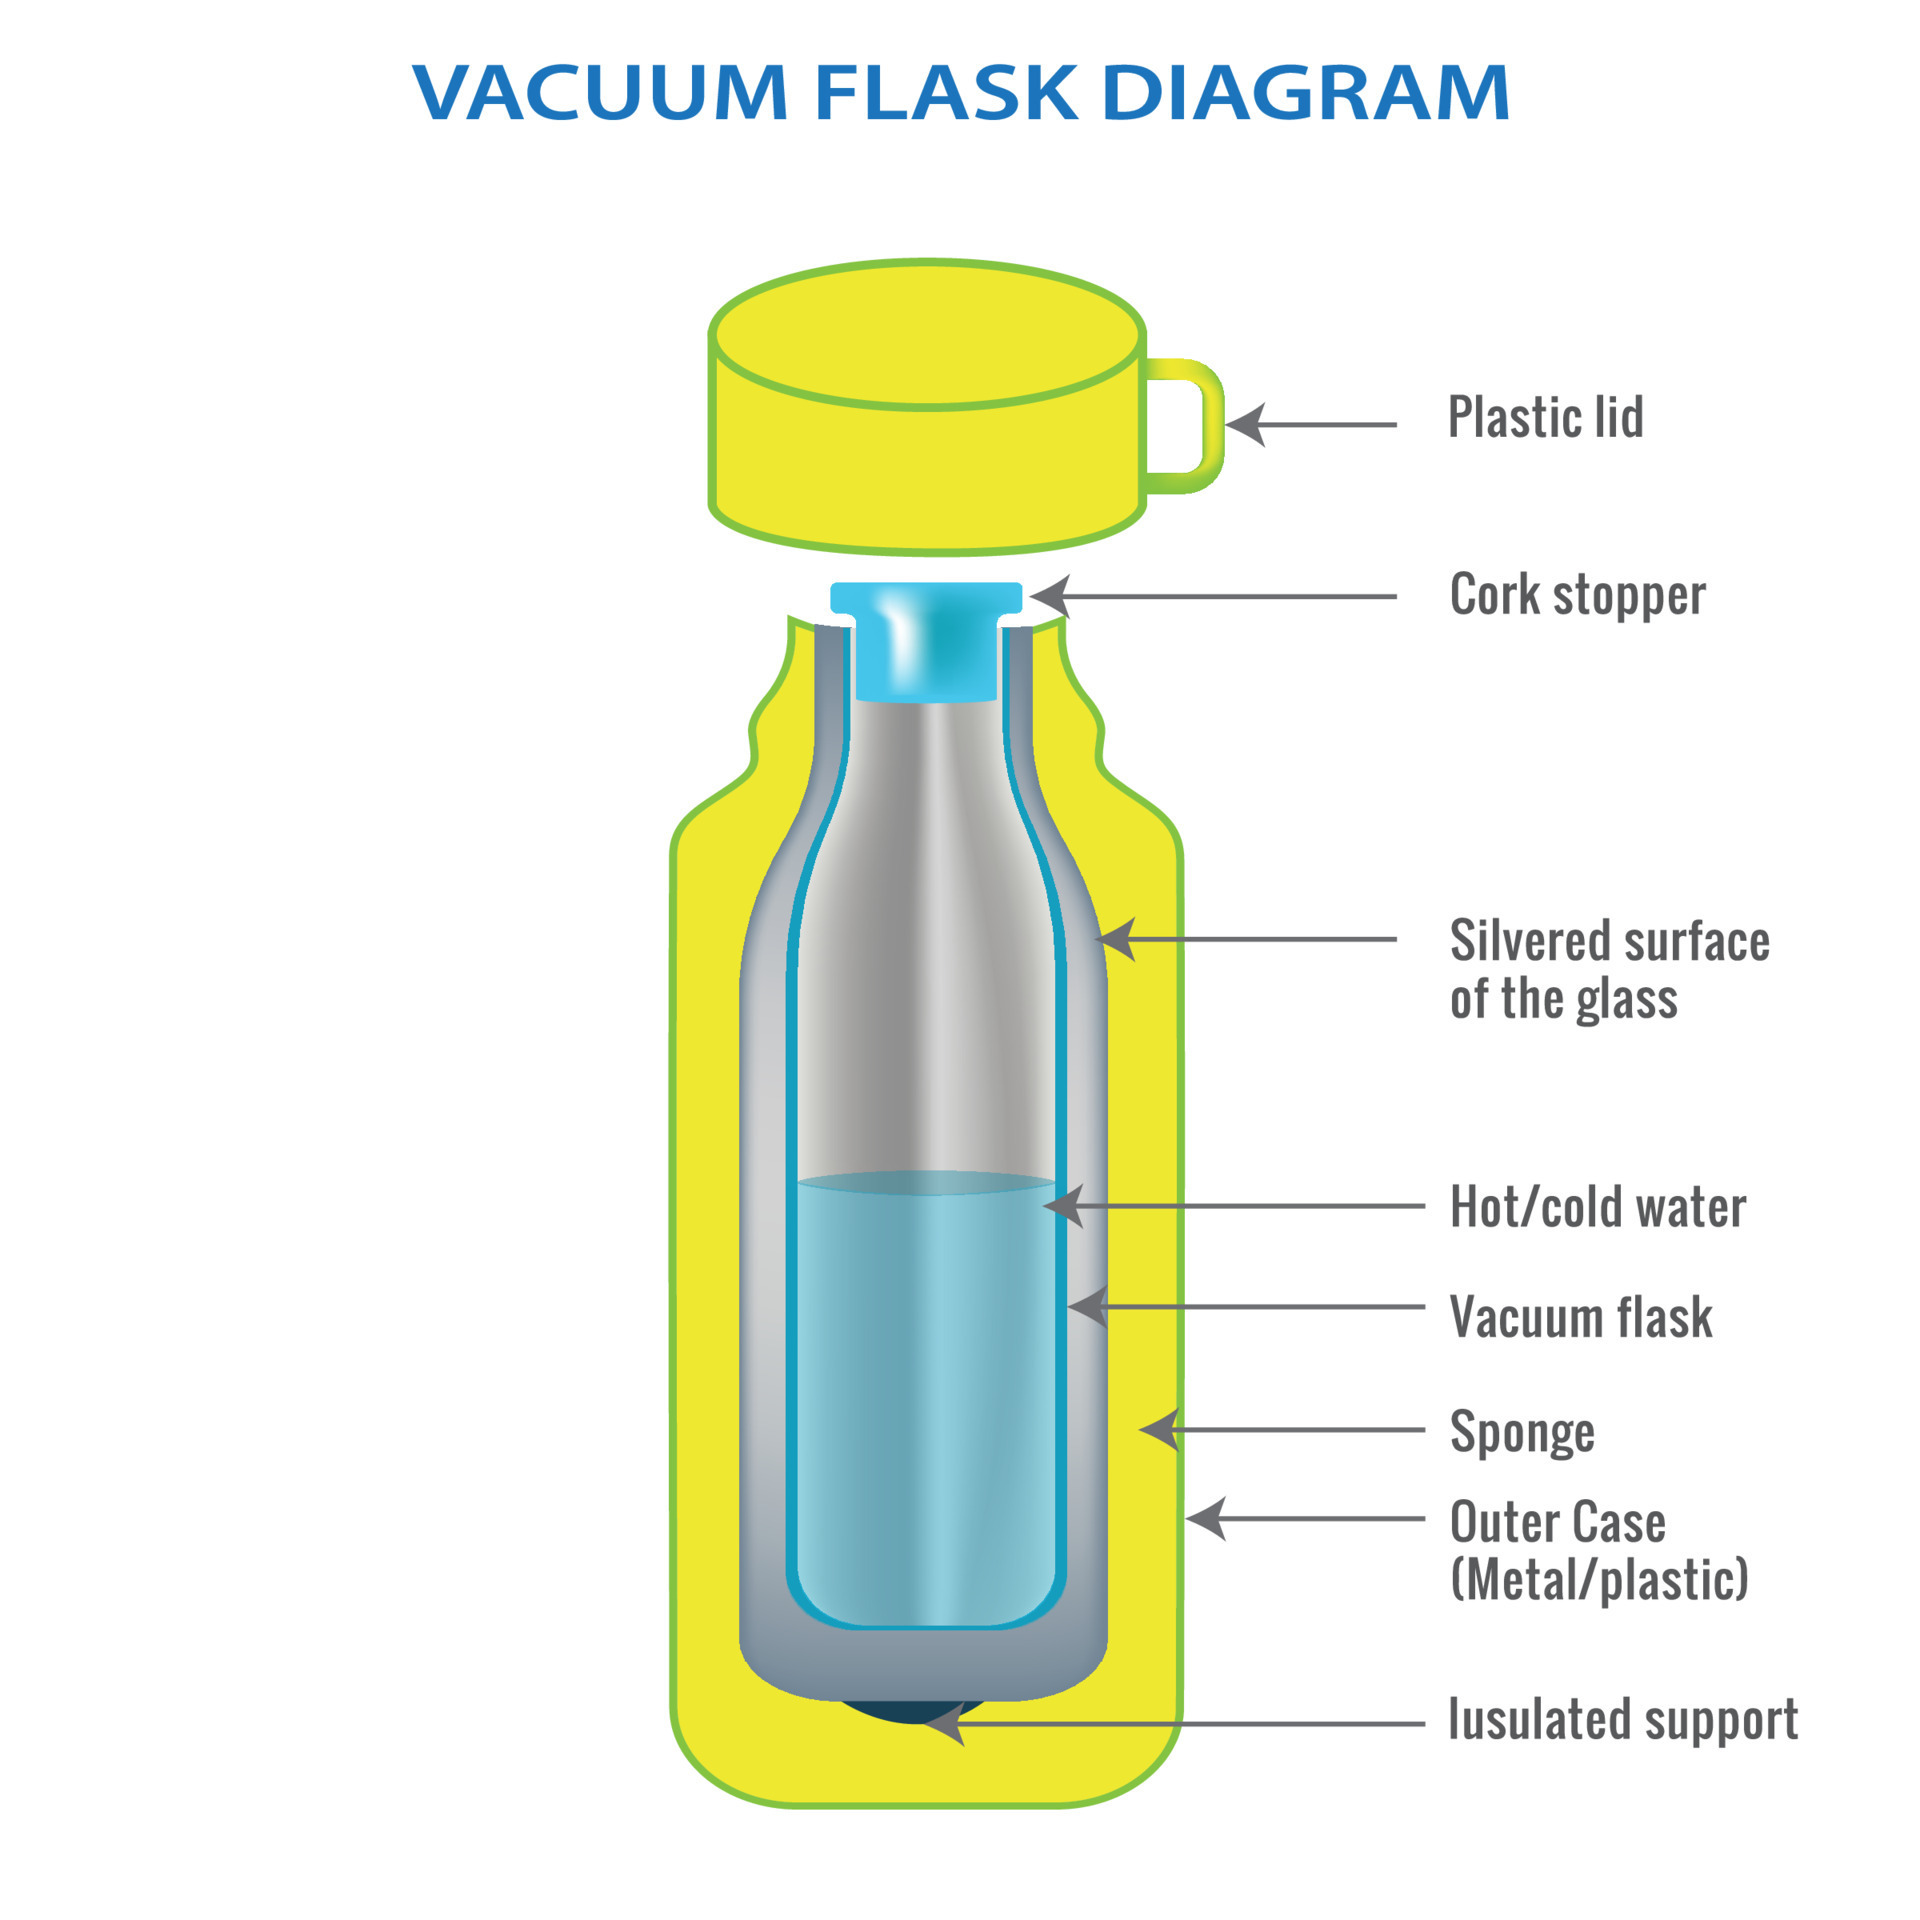 https://static.vecteezy.com/system/resources/previews/021/669/358/original/vacuum-flask-or-thermo-flask-diagram-image-vector.jpg